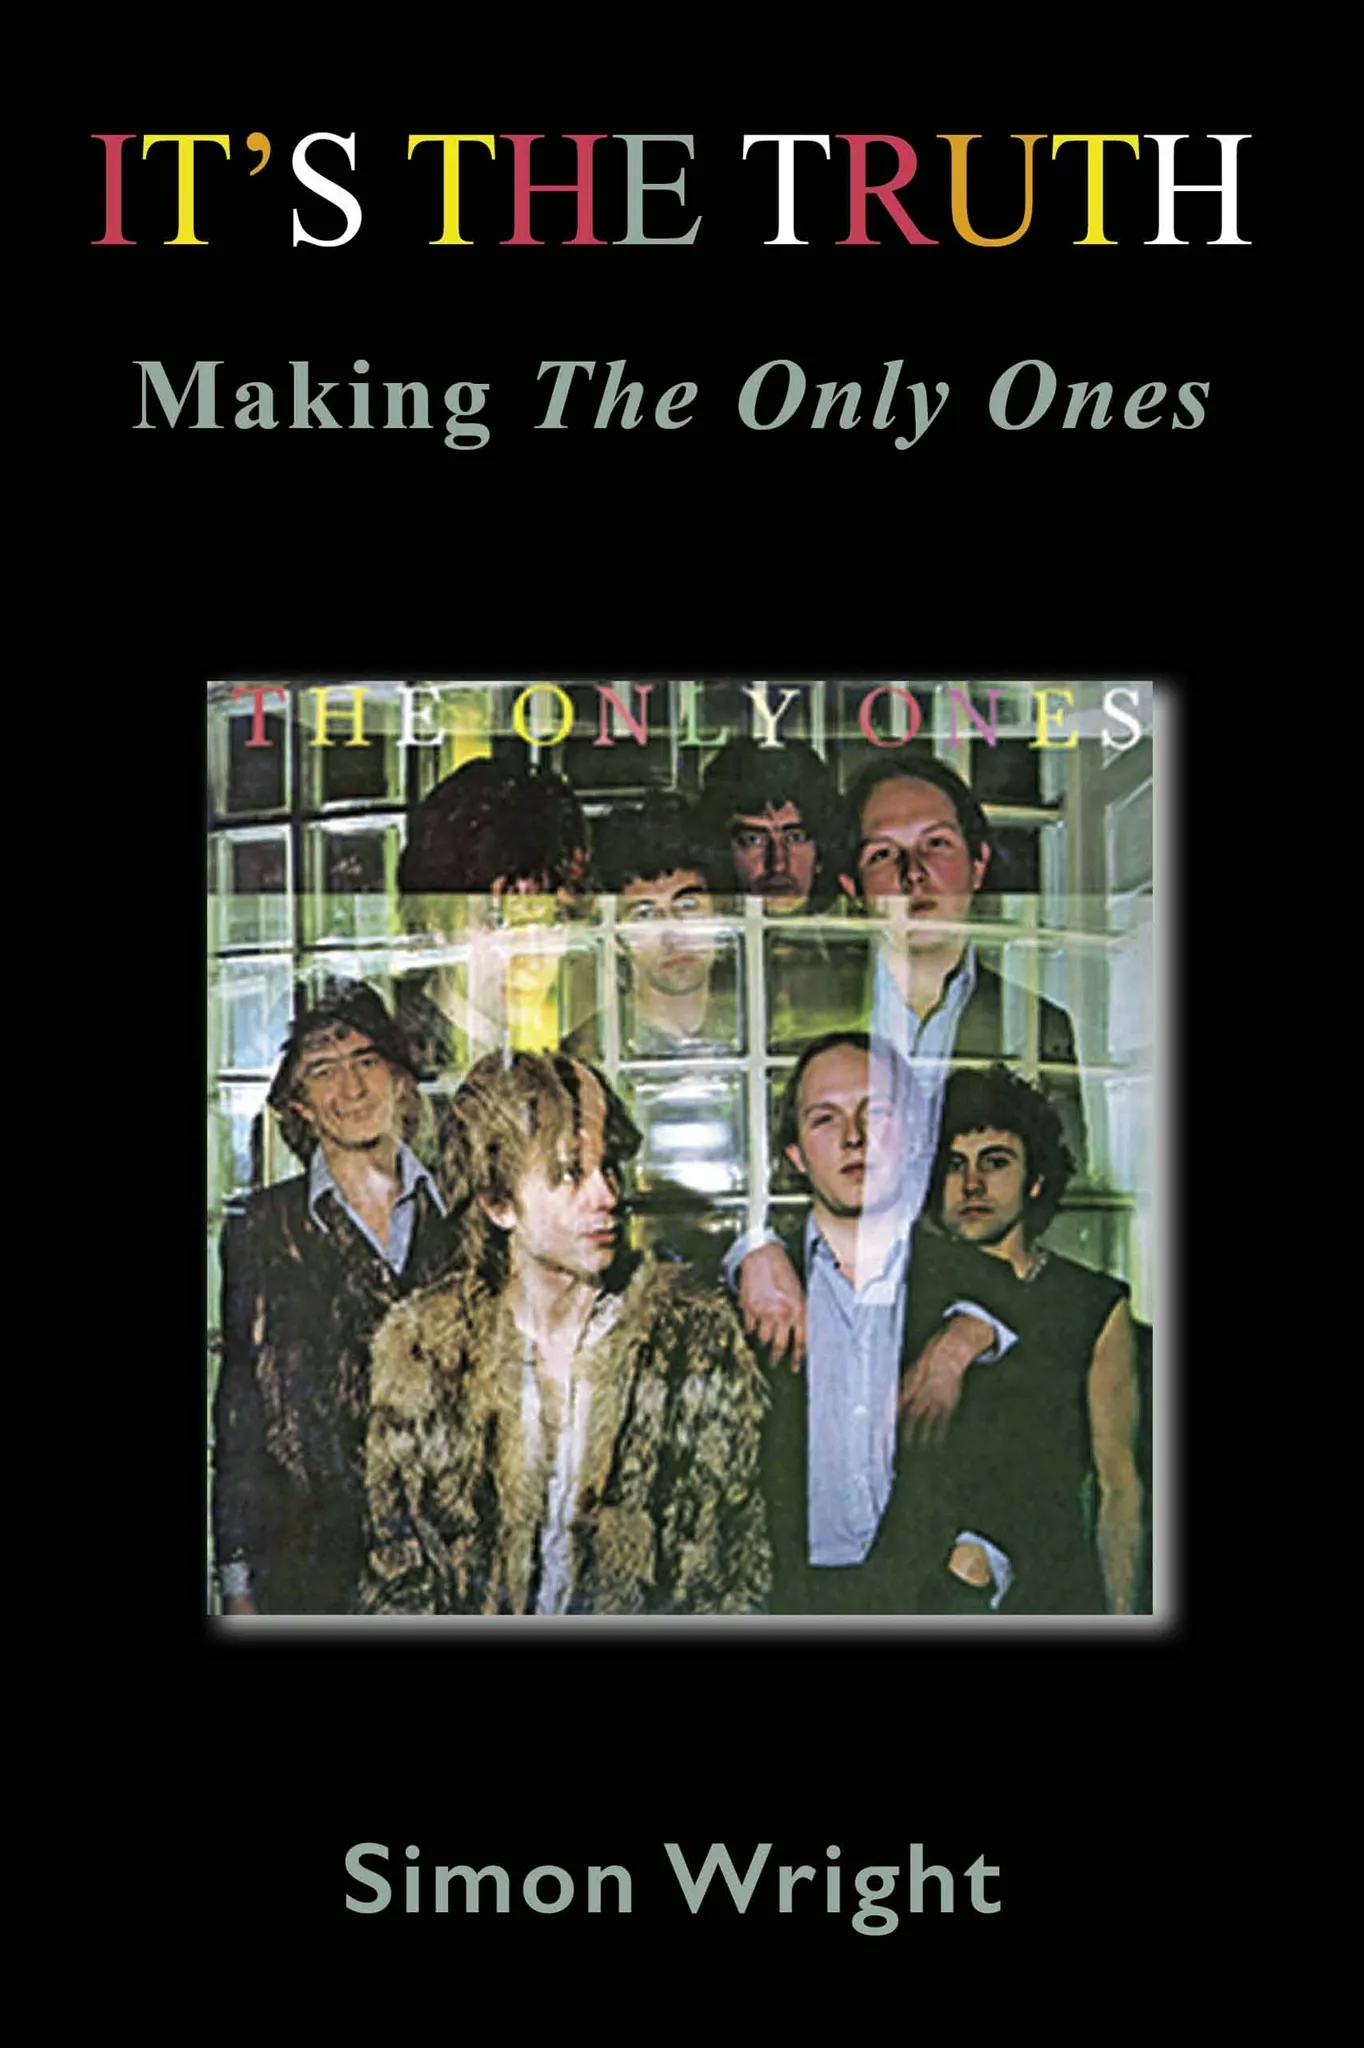 Album artwork for It’s The Truth – Making The Only Ones by Simon Wright